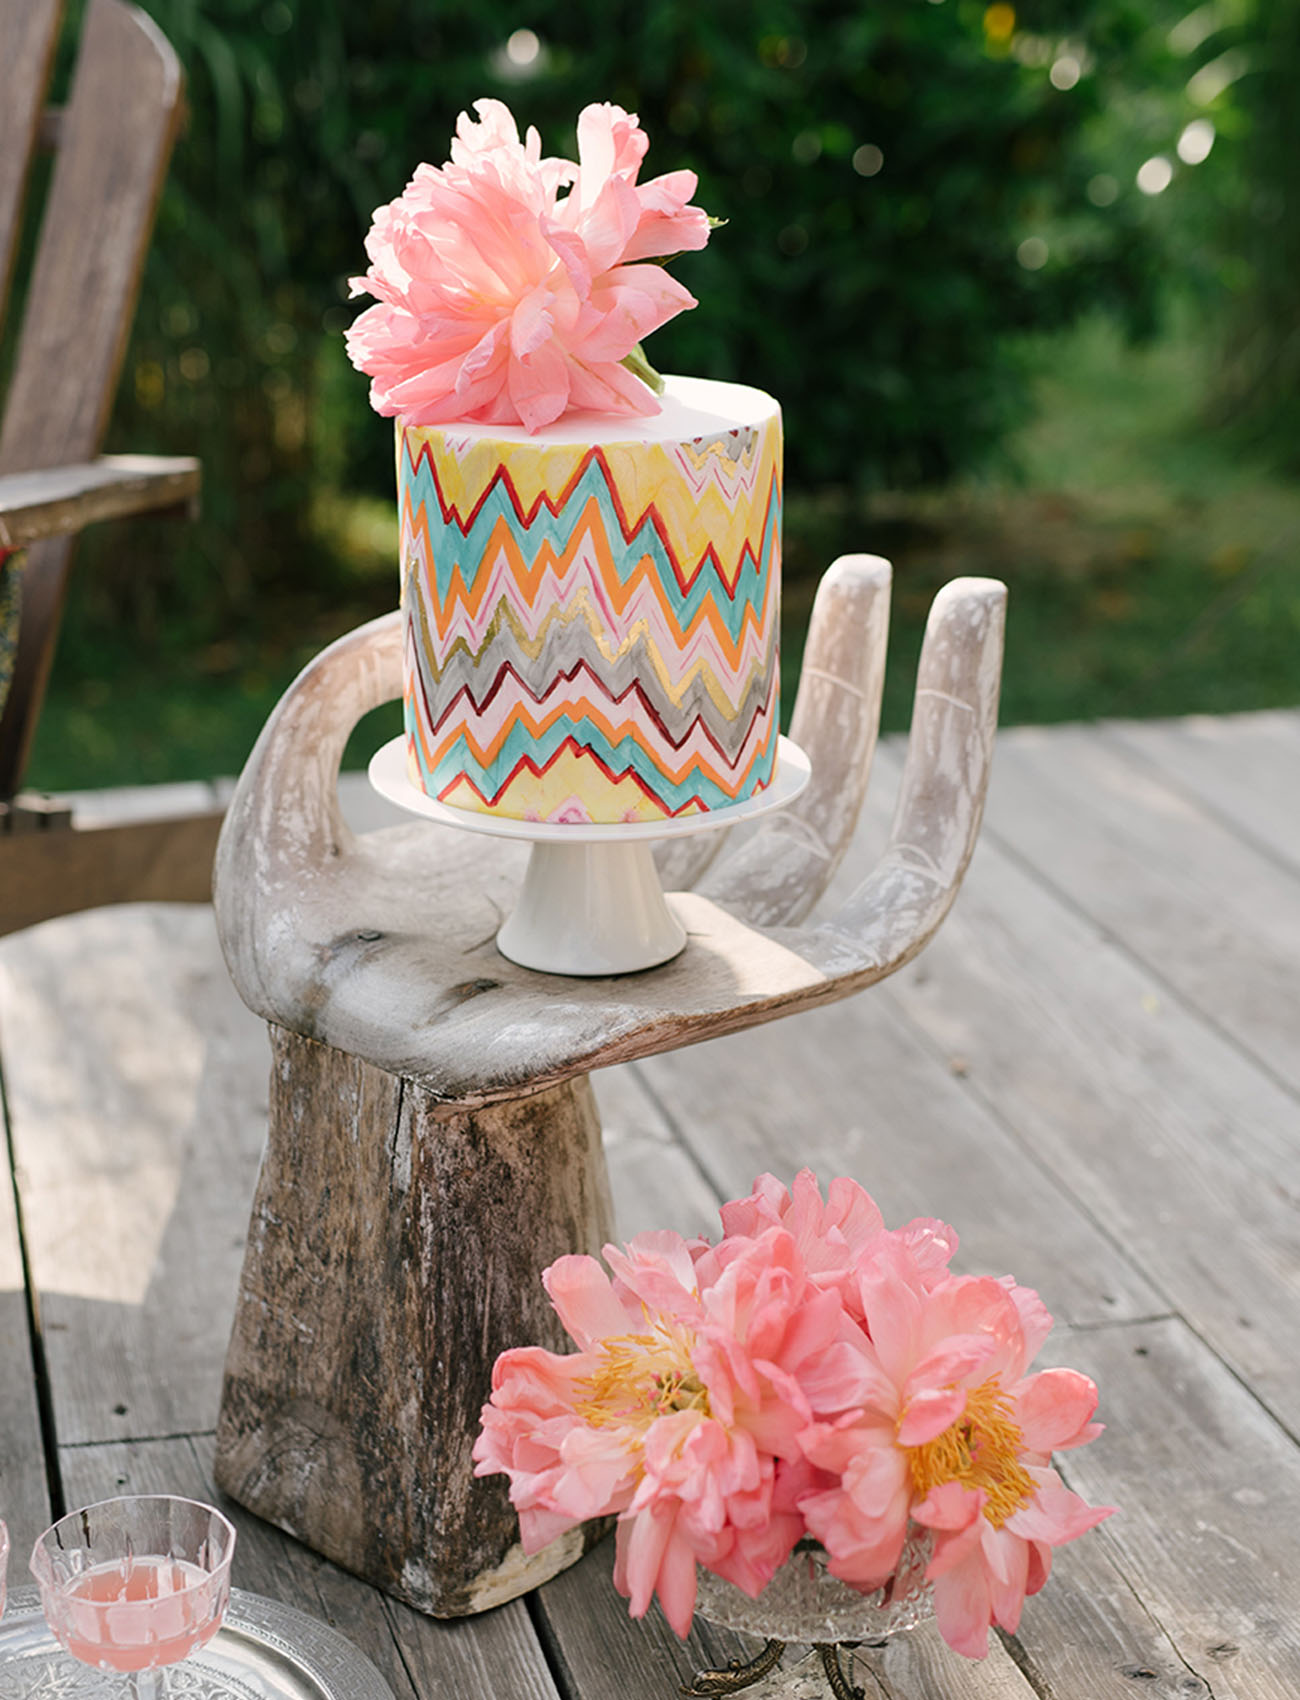 the wedding cake was a colorful one with bold geometric patterns and a fresh peony on top